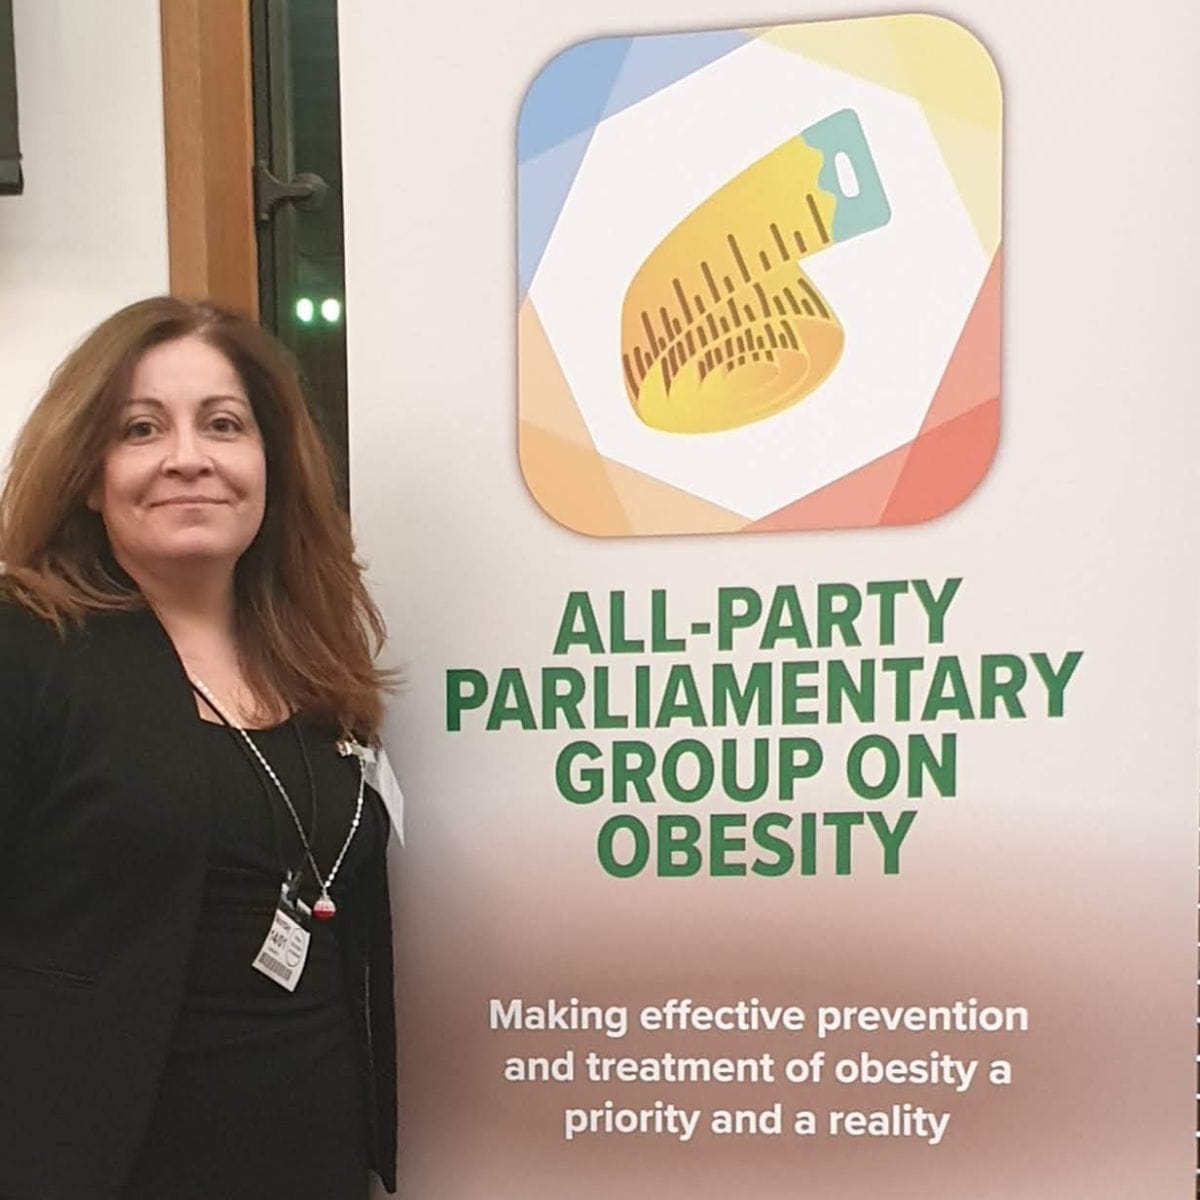 A woman standing beside a banner of the all-party parliamentary group on obesity, featuring its logo.